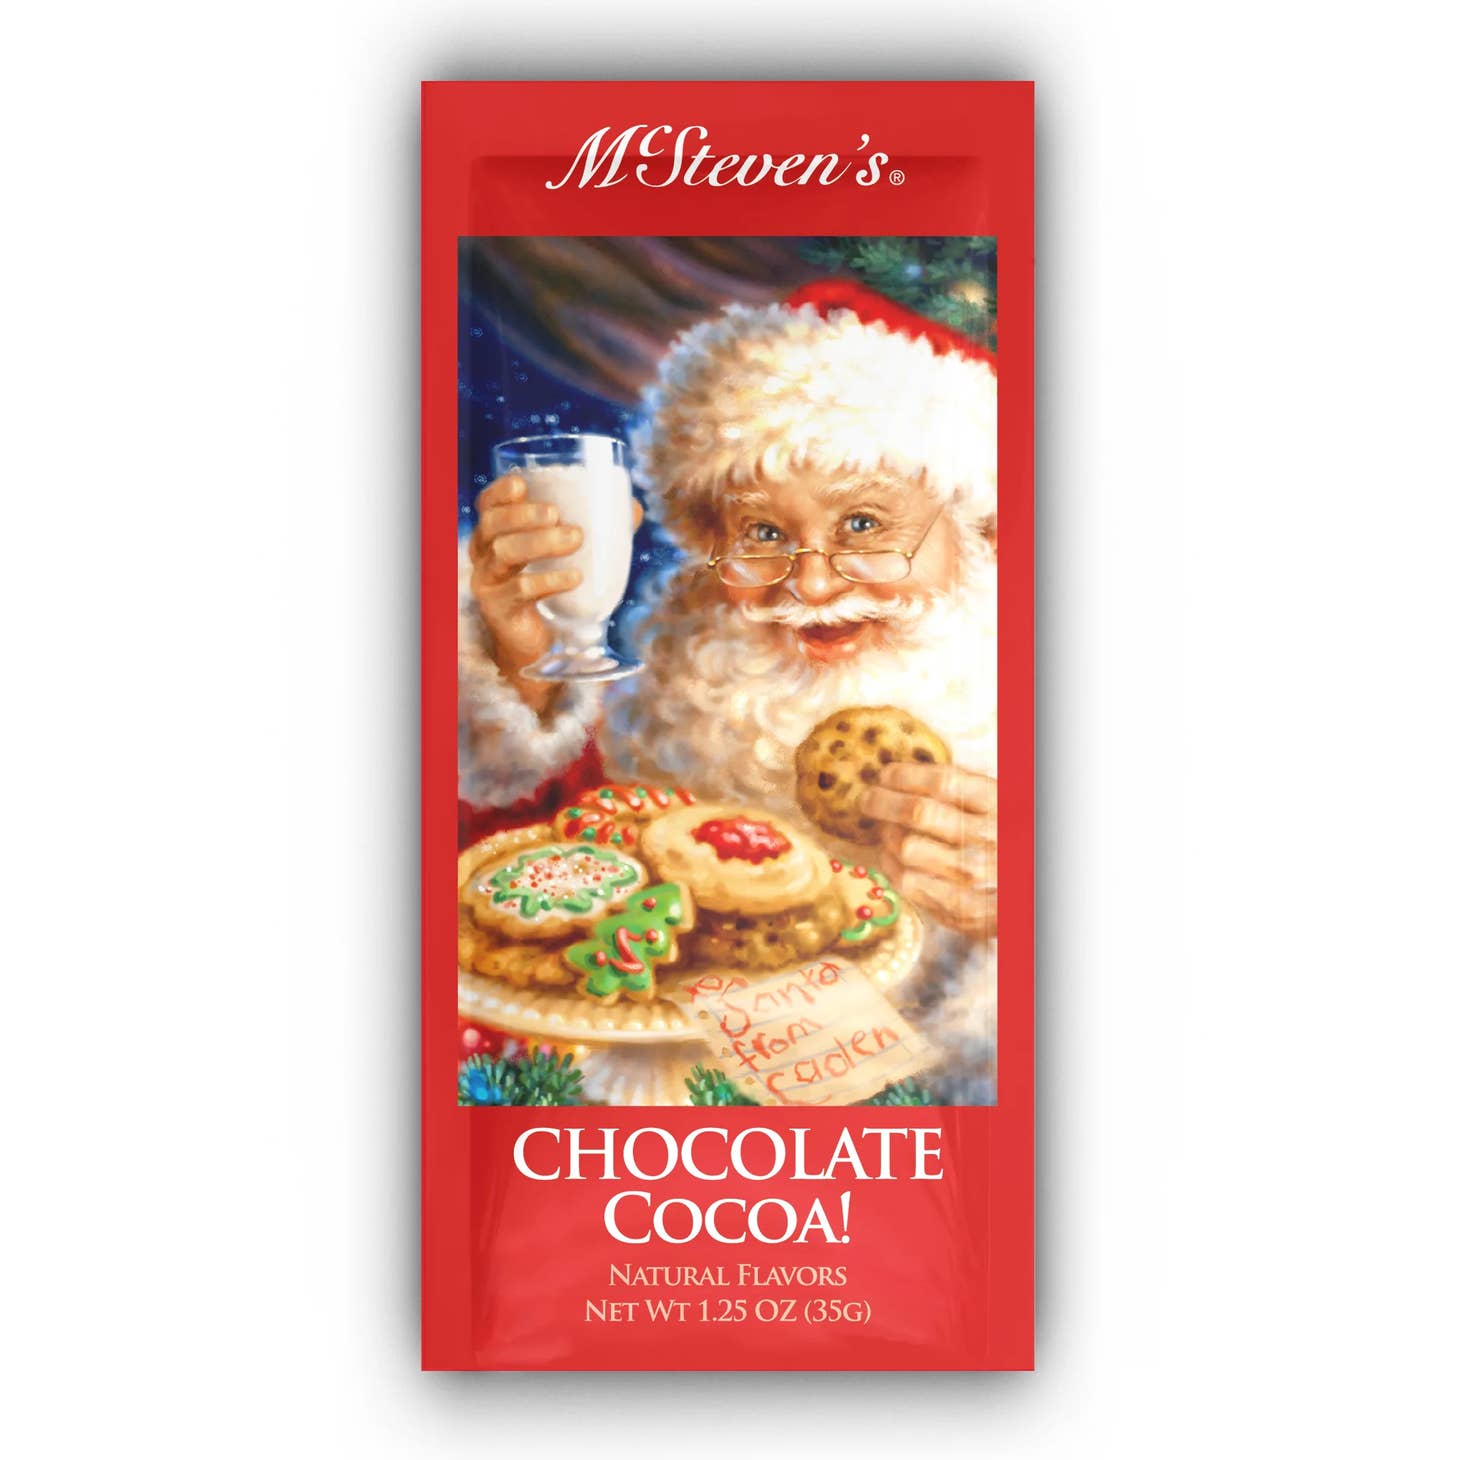 santa chocolate cocoa packet with santa eating a cookie printed on the front of the packet.